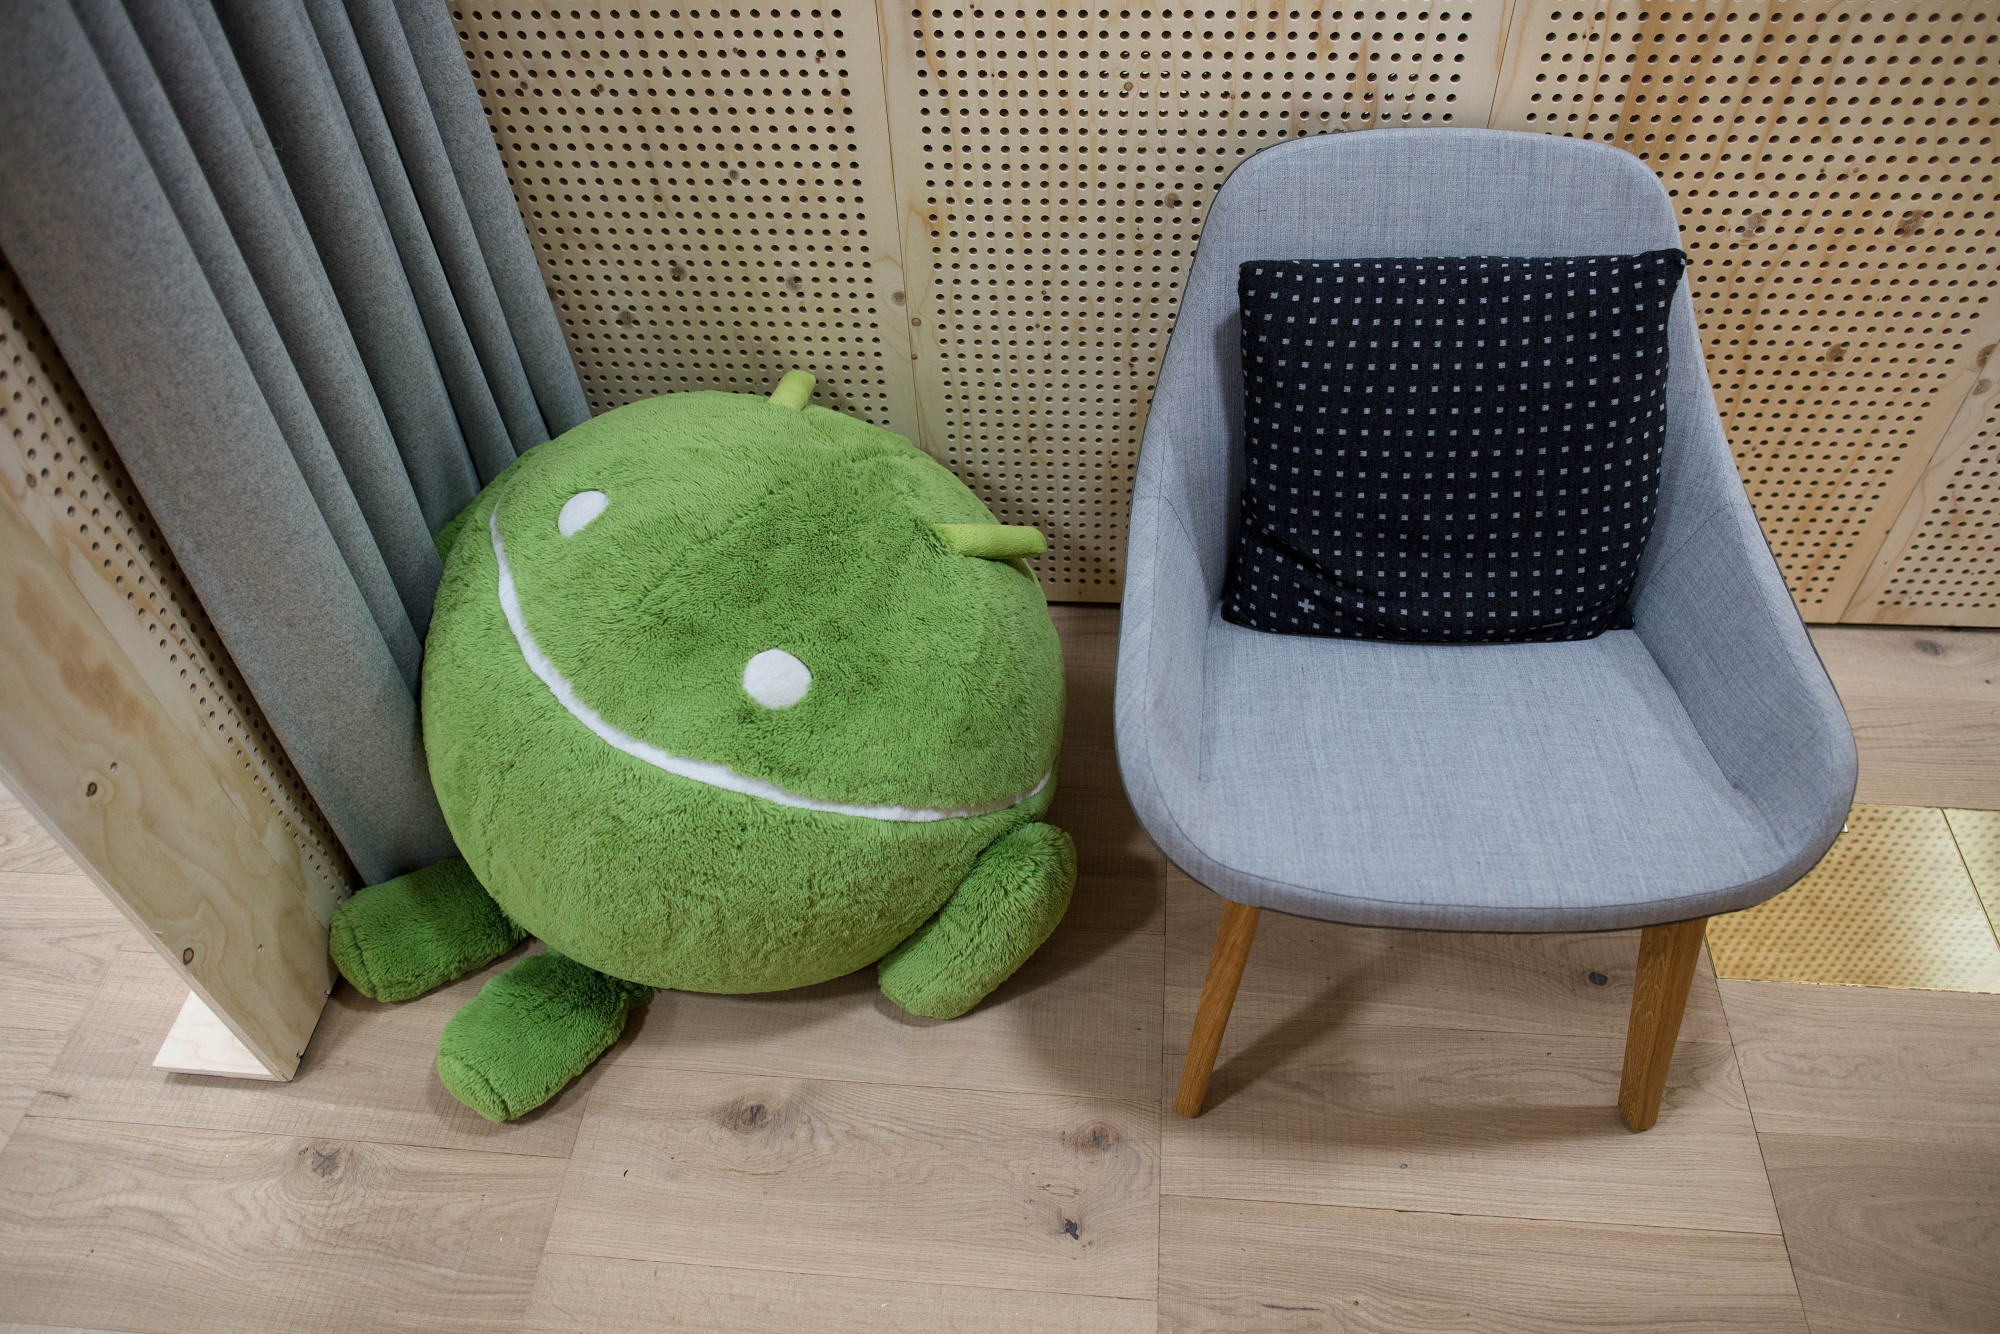 A soft toy depicting the Android logo sits in a workspace at Google Inc.'s Kings Cross office in London, U.K., on Tuesday, Nov. 15, 2016. After being criticized for not paying its fair share of British tax, Alphabet Inc.’s Google unit is trying to show it’s a good corporate citizen by offering five hours of free digital skills training to all U.K. residents.